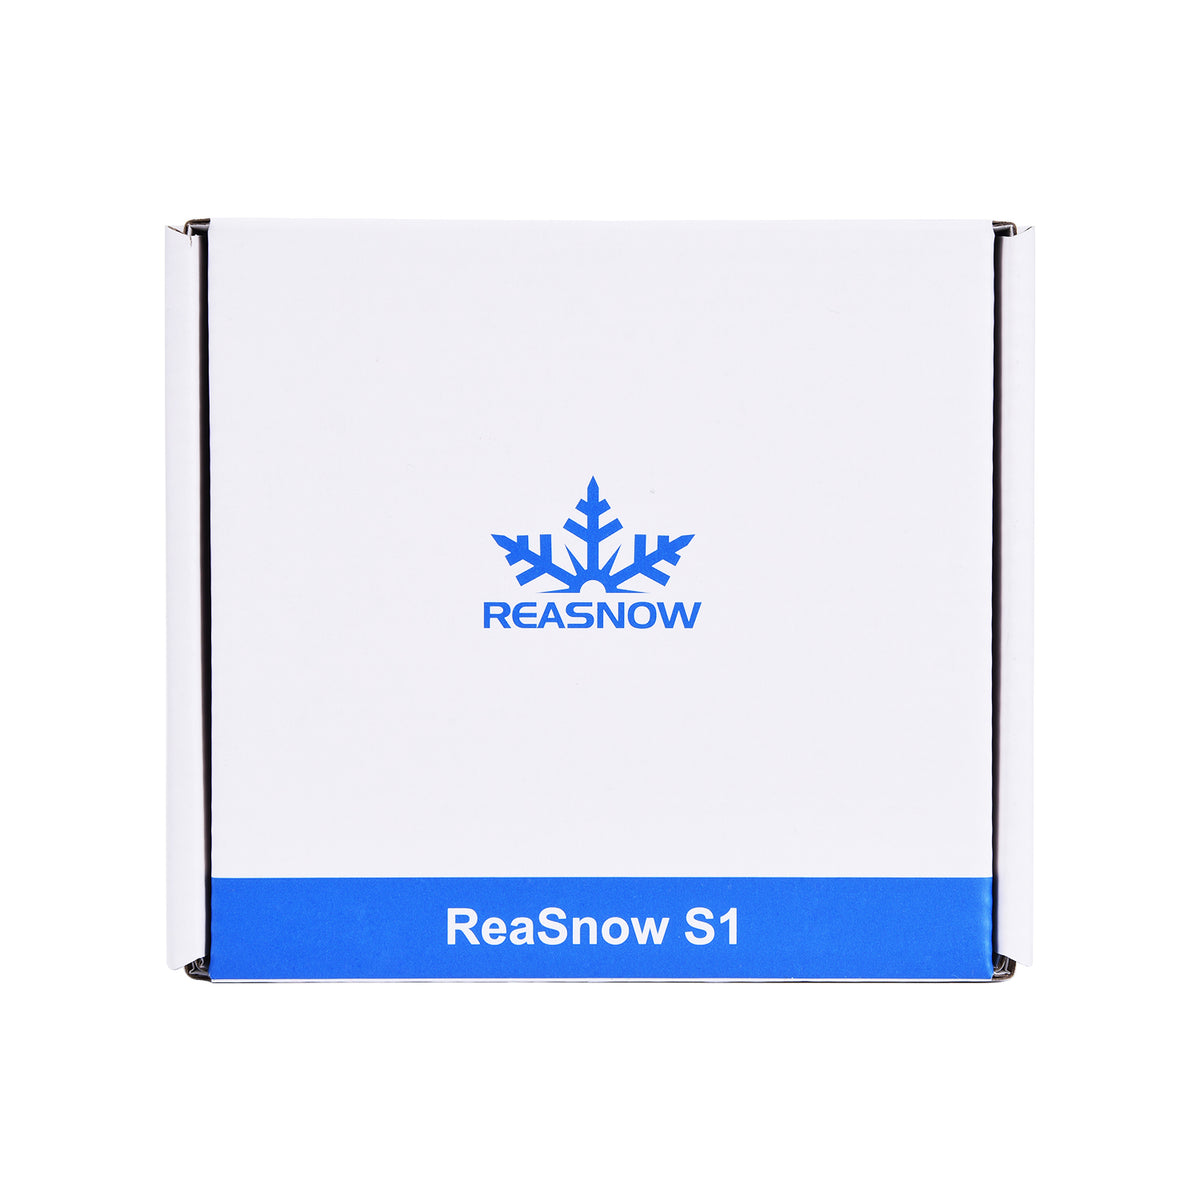 ReaSnow S1 Converter For PS4 Pro/PS4 Slim/PS4/PS3/Xbox One X/Xbox 